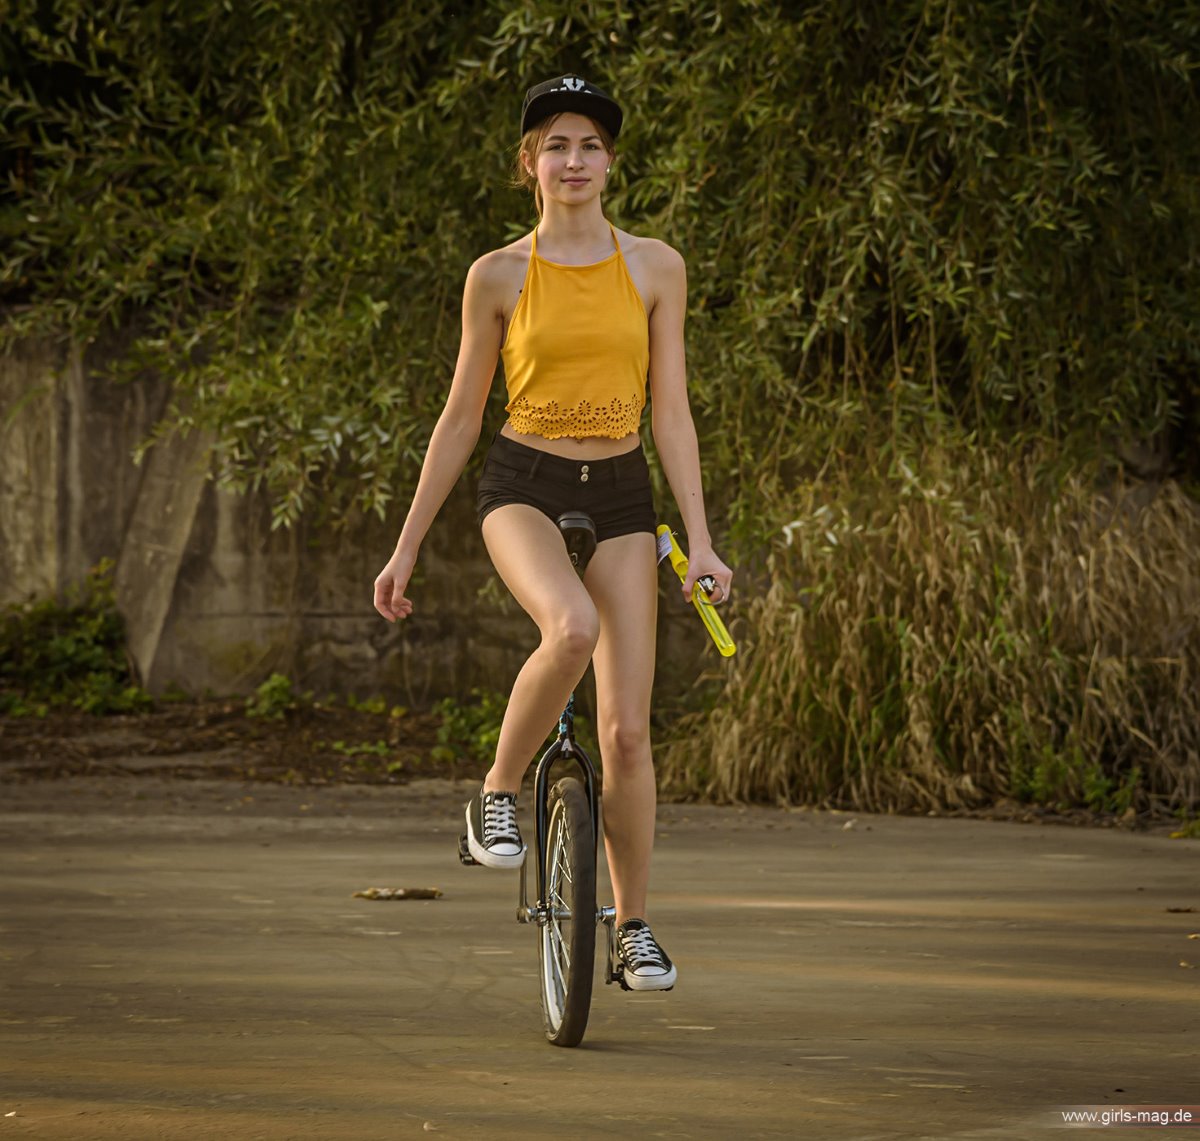 Girls Mag Annika Bubbles on a Unicycle 0028 6427342860.jpg